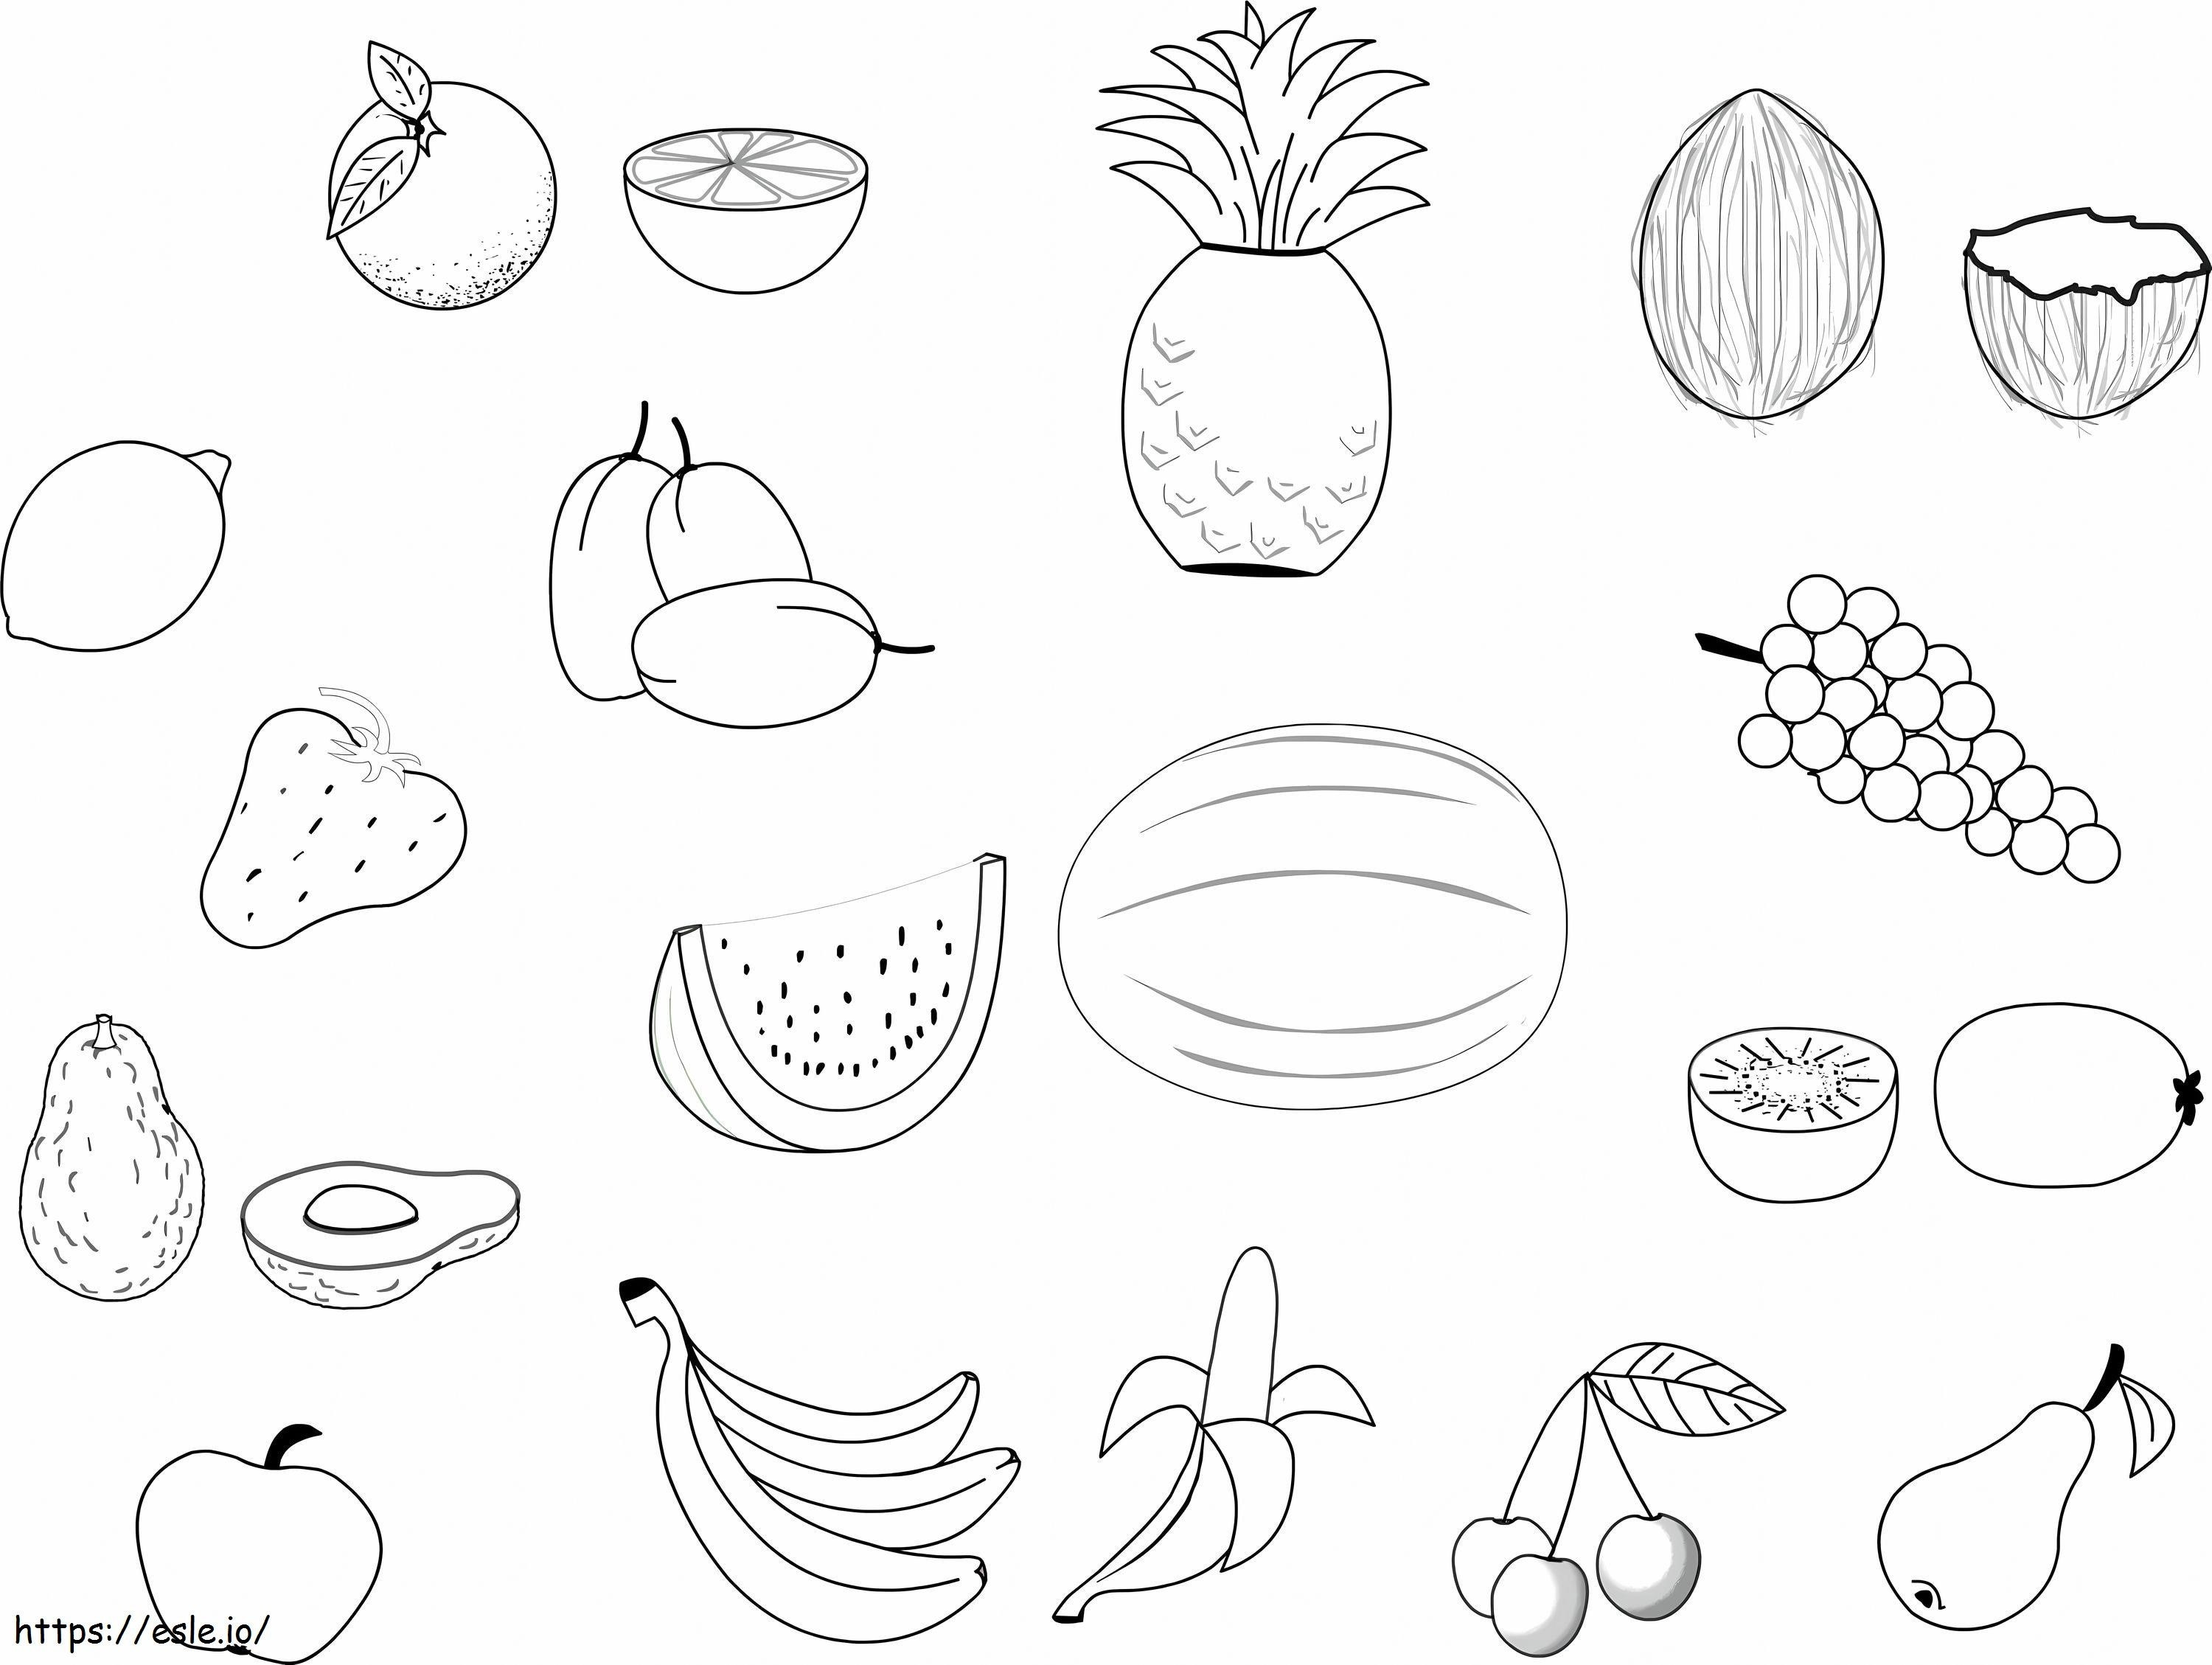 Five Fruit Fun coloring page